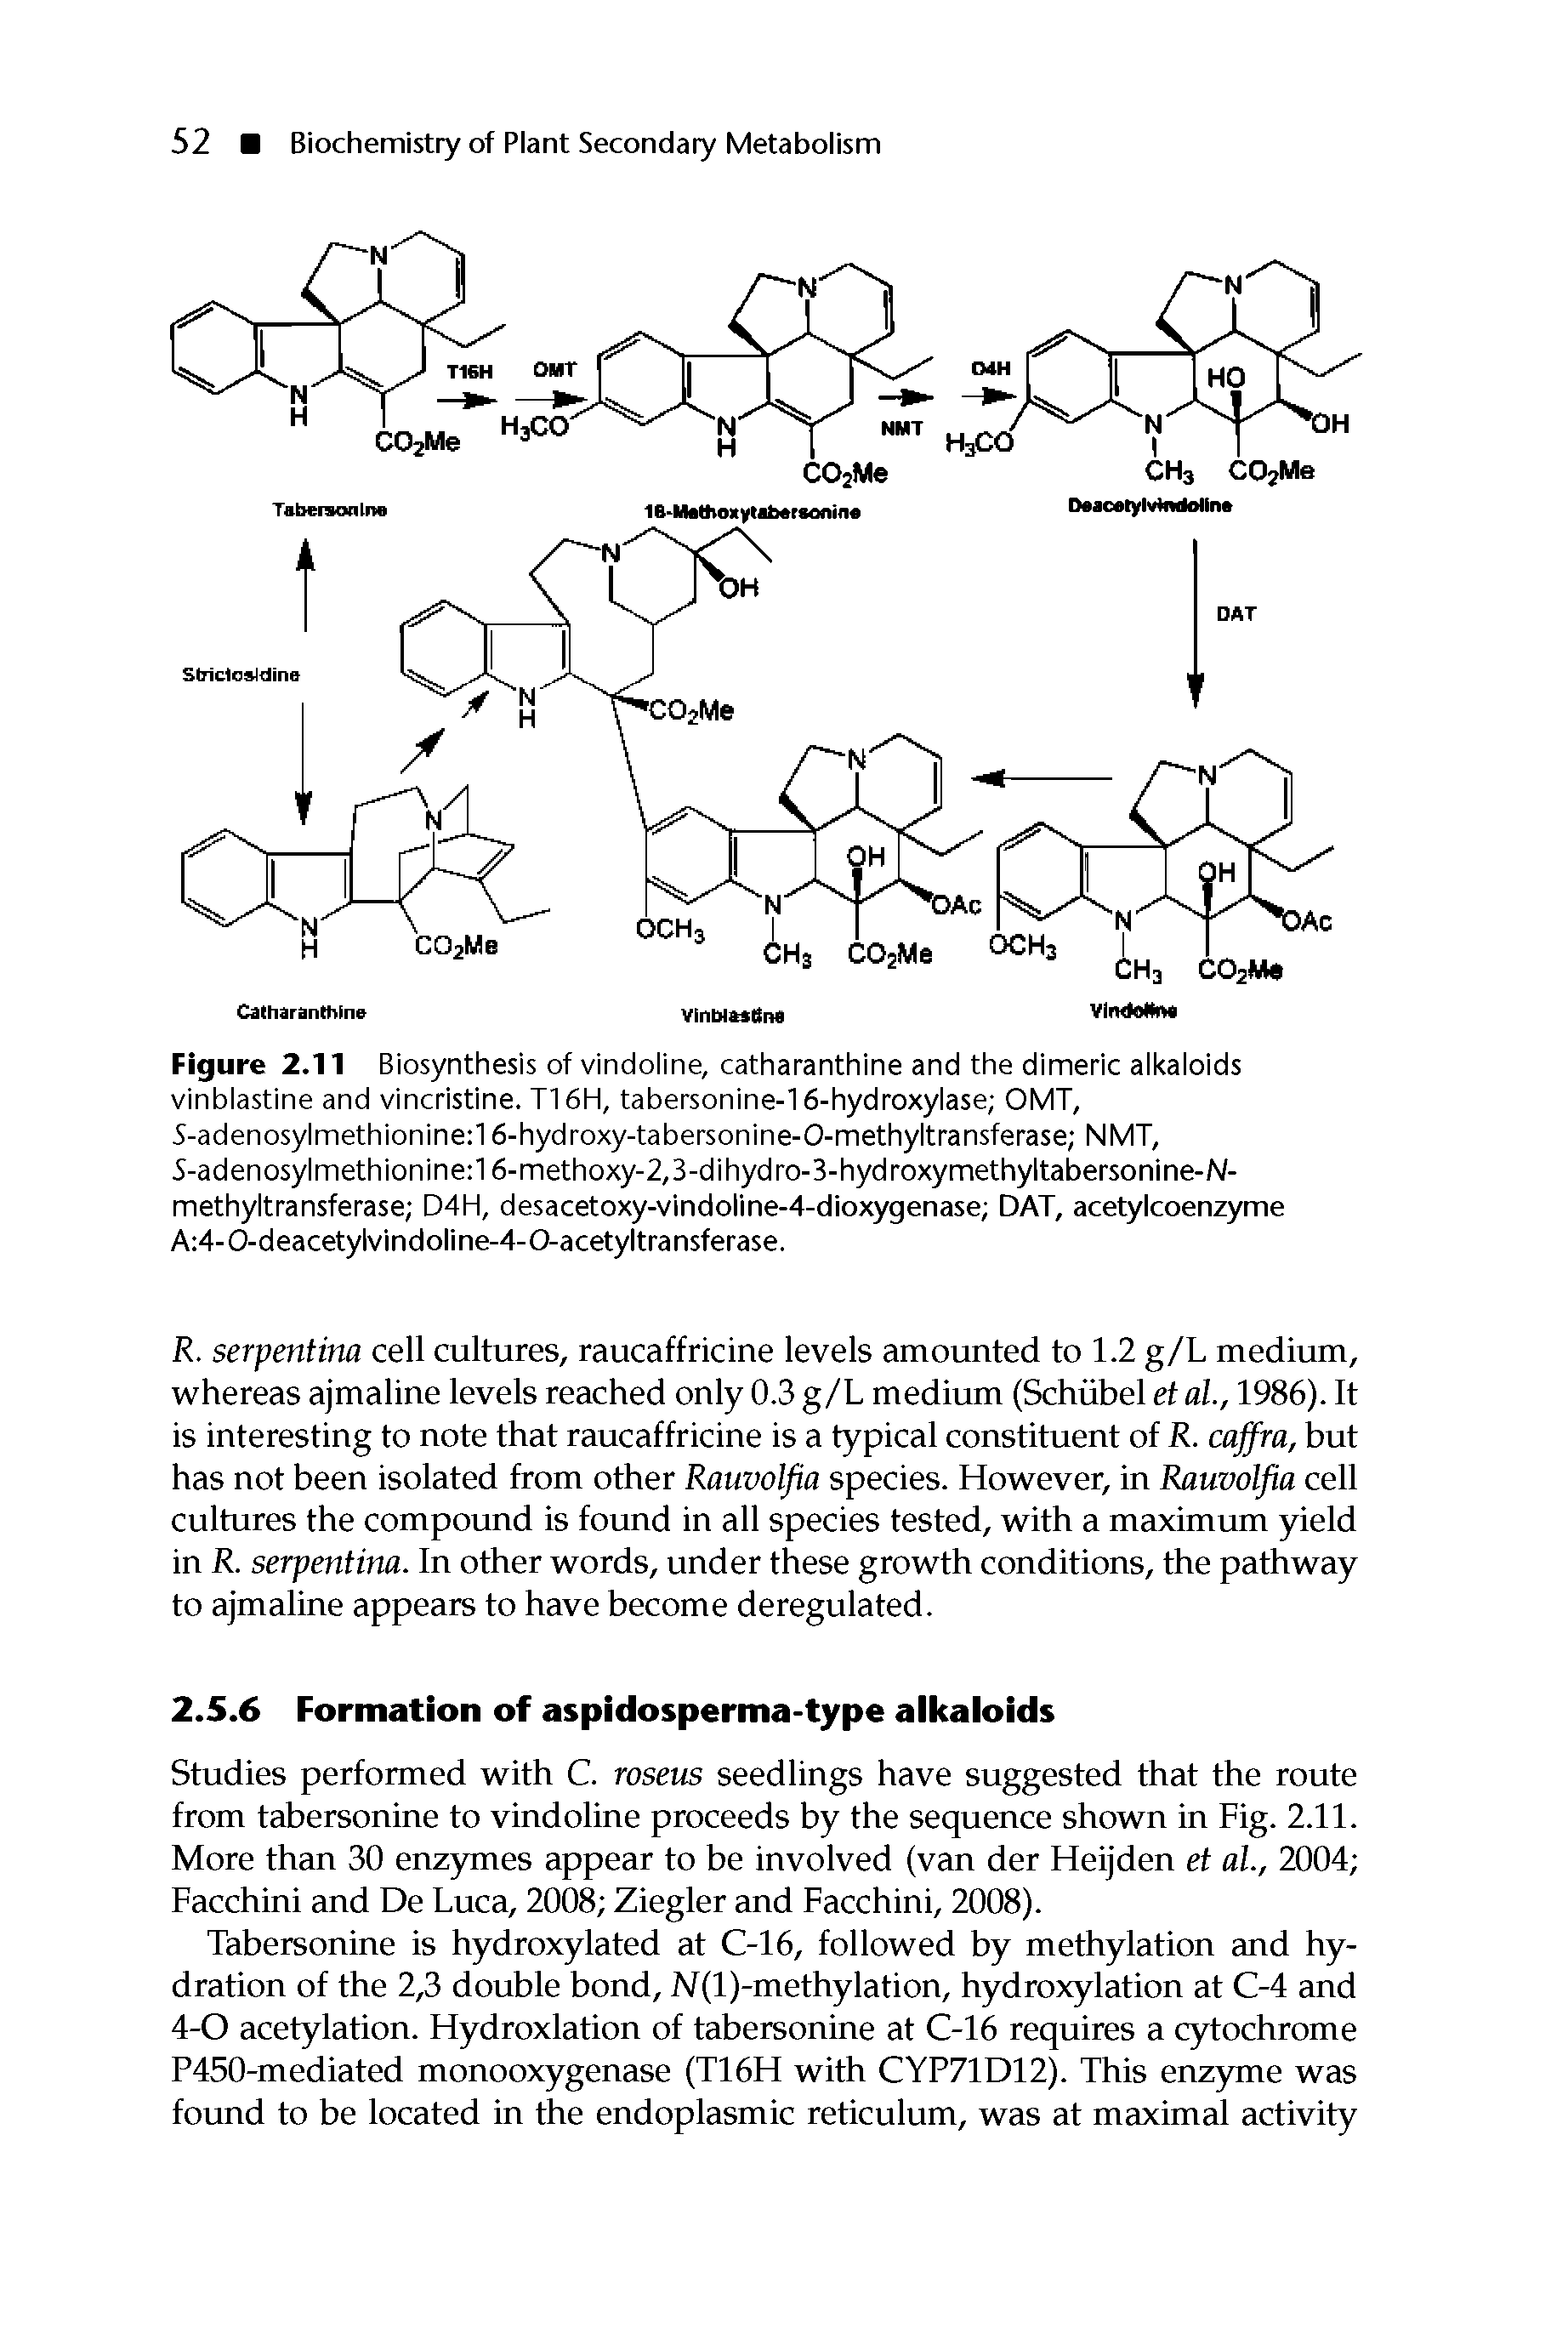 Figure 2.11 Biosynthesis of vindoline, catharanthine and the dimeric alkaloids vinblastine and vincristine. T16H, tabersonine-16-hydroxylase OMT, 5-adenosylmethionine 16-hydroxy-tabersonine-O-methyltransferase NMT, 5-adenosylmethionine 16-methoxy-2,3-dihydro-3-hydroxymethyltabersonine-/ /-methyltransferase D4H, desacetoxy-vindoline-4-dioxygenase DAT, acetylcoenzyme A 4-0-deacetylvindoline-4-0-acetyltransferase.